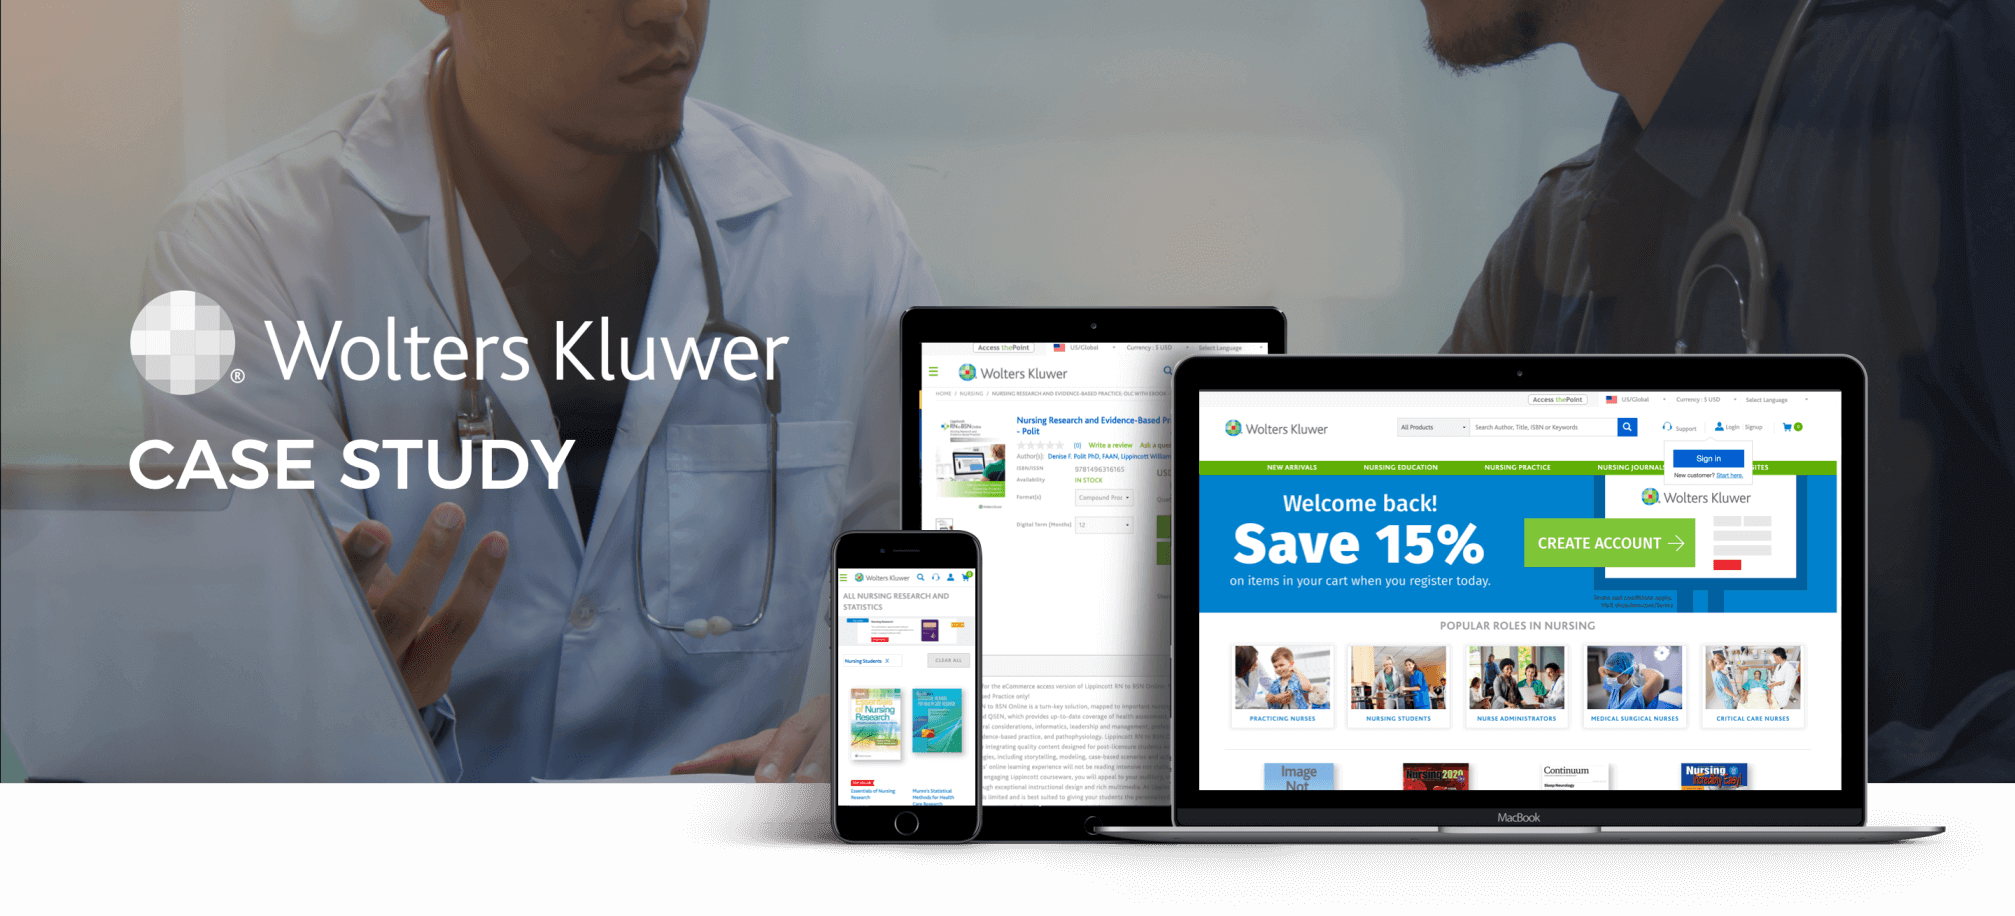 kibo commerce Wolters Kluwer